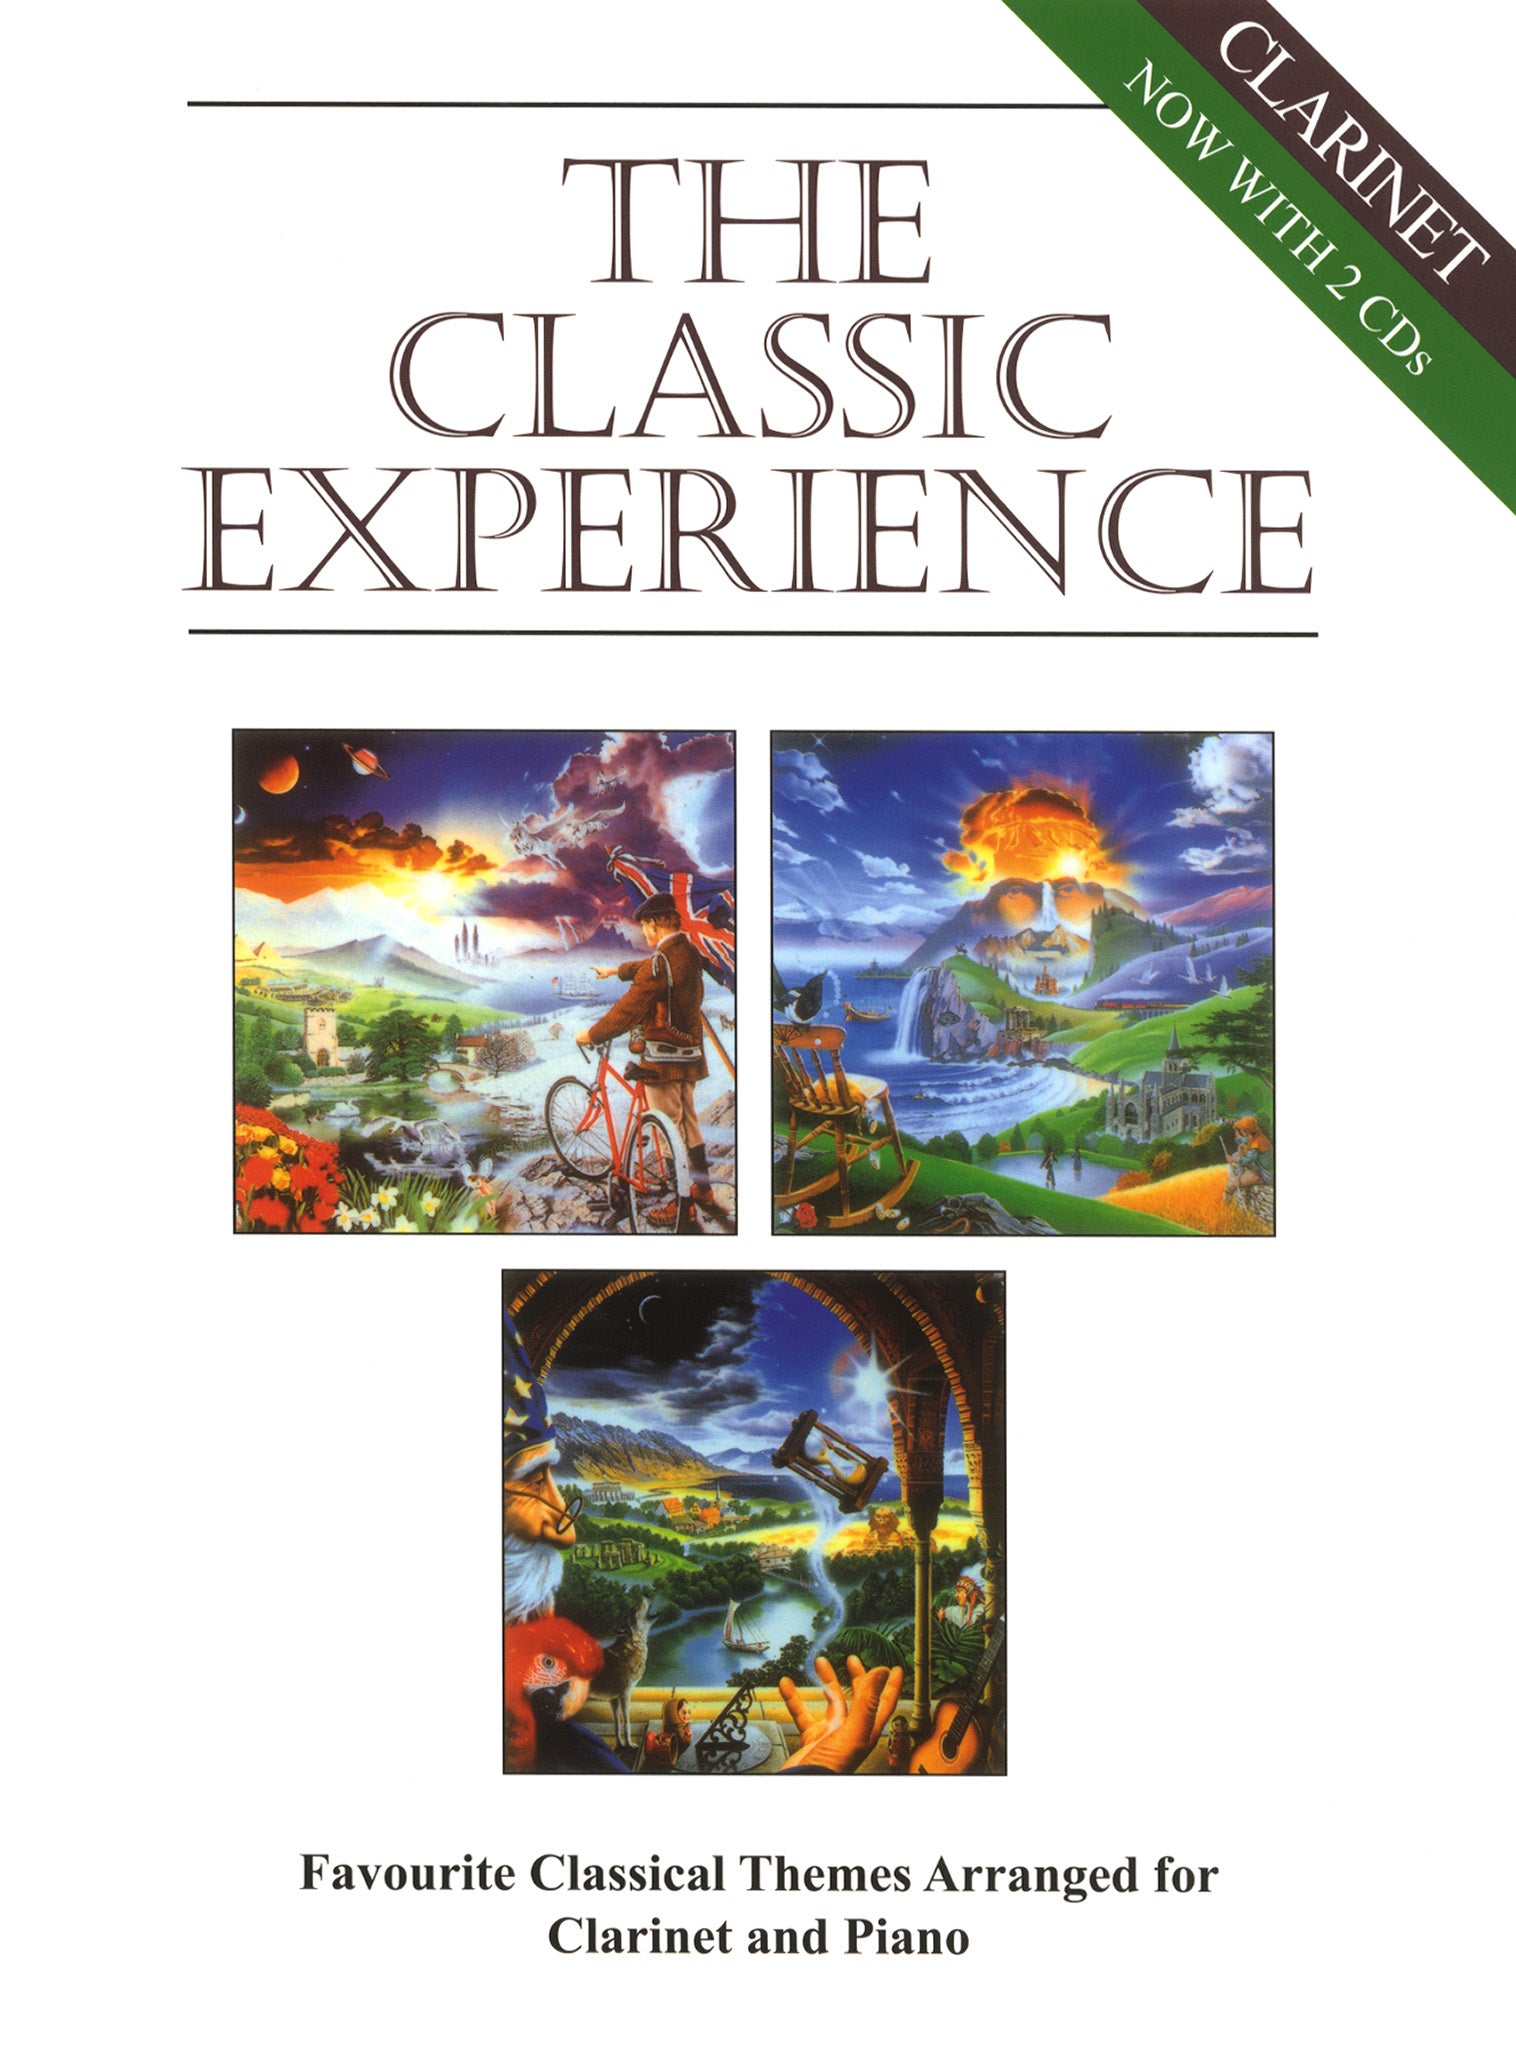 The Classic Experience Clarinet and Piano arrangements cover